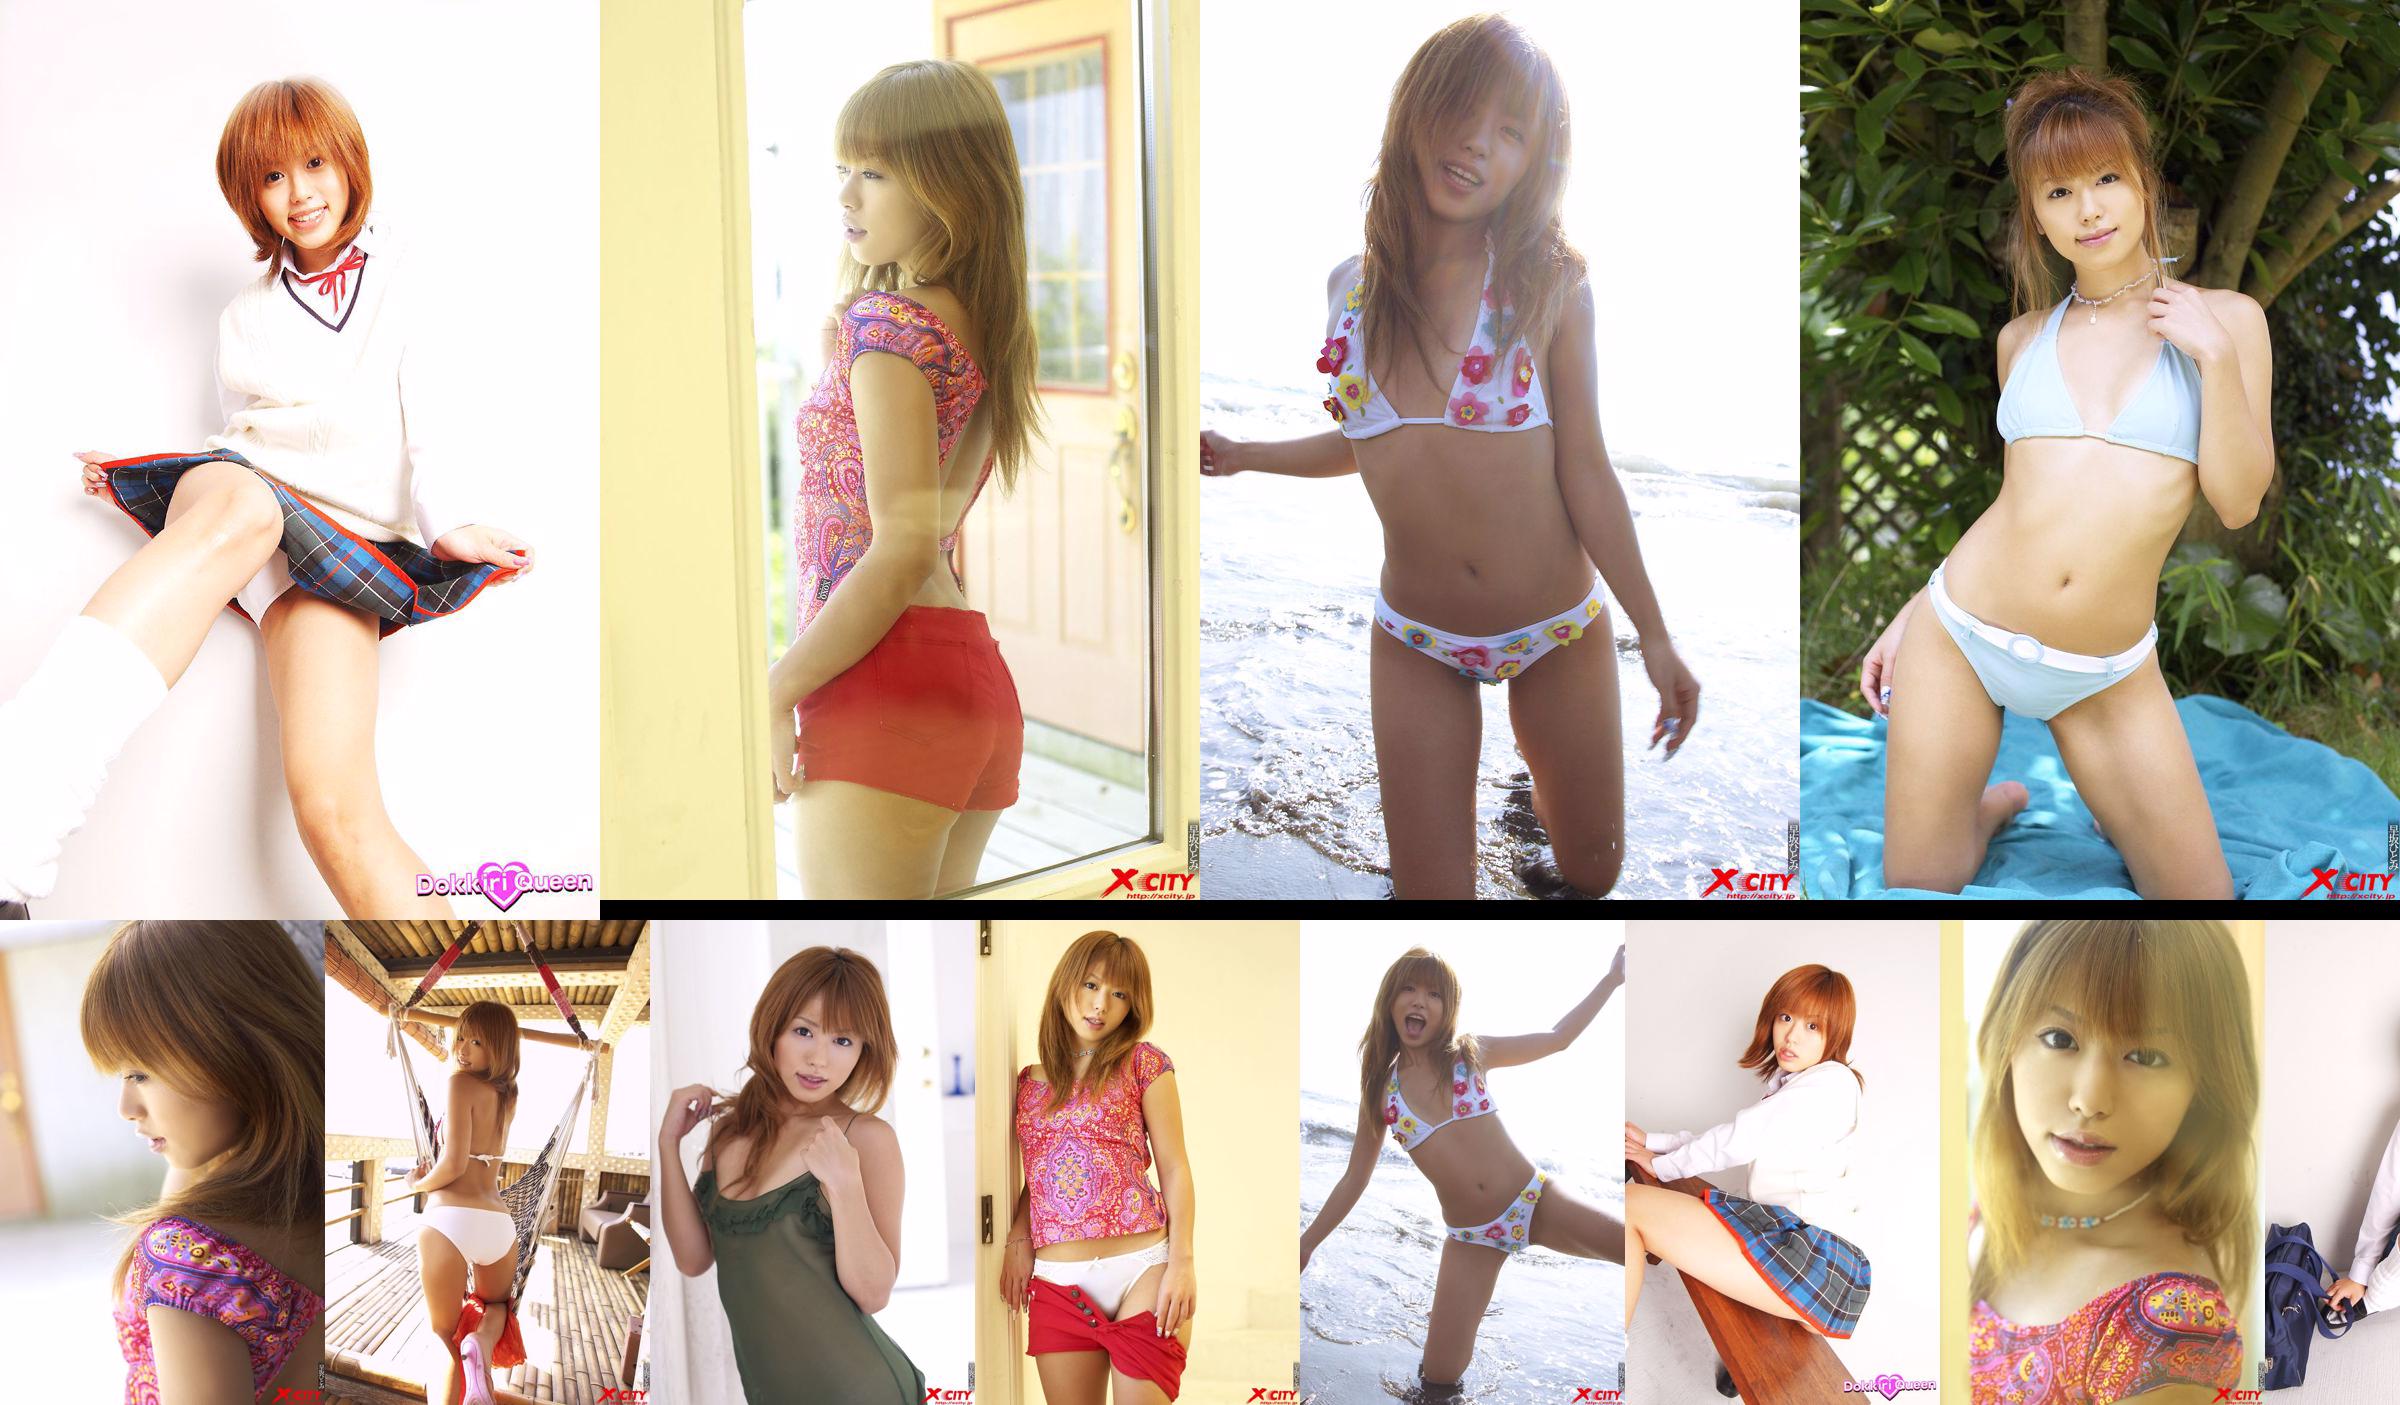 Shiina れ い か "Sprinkled Jewel" [Graphis] Gals No.1ab47d Page 9